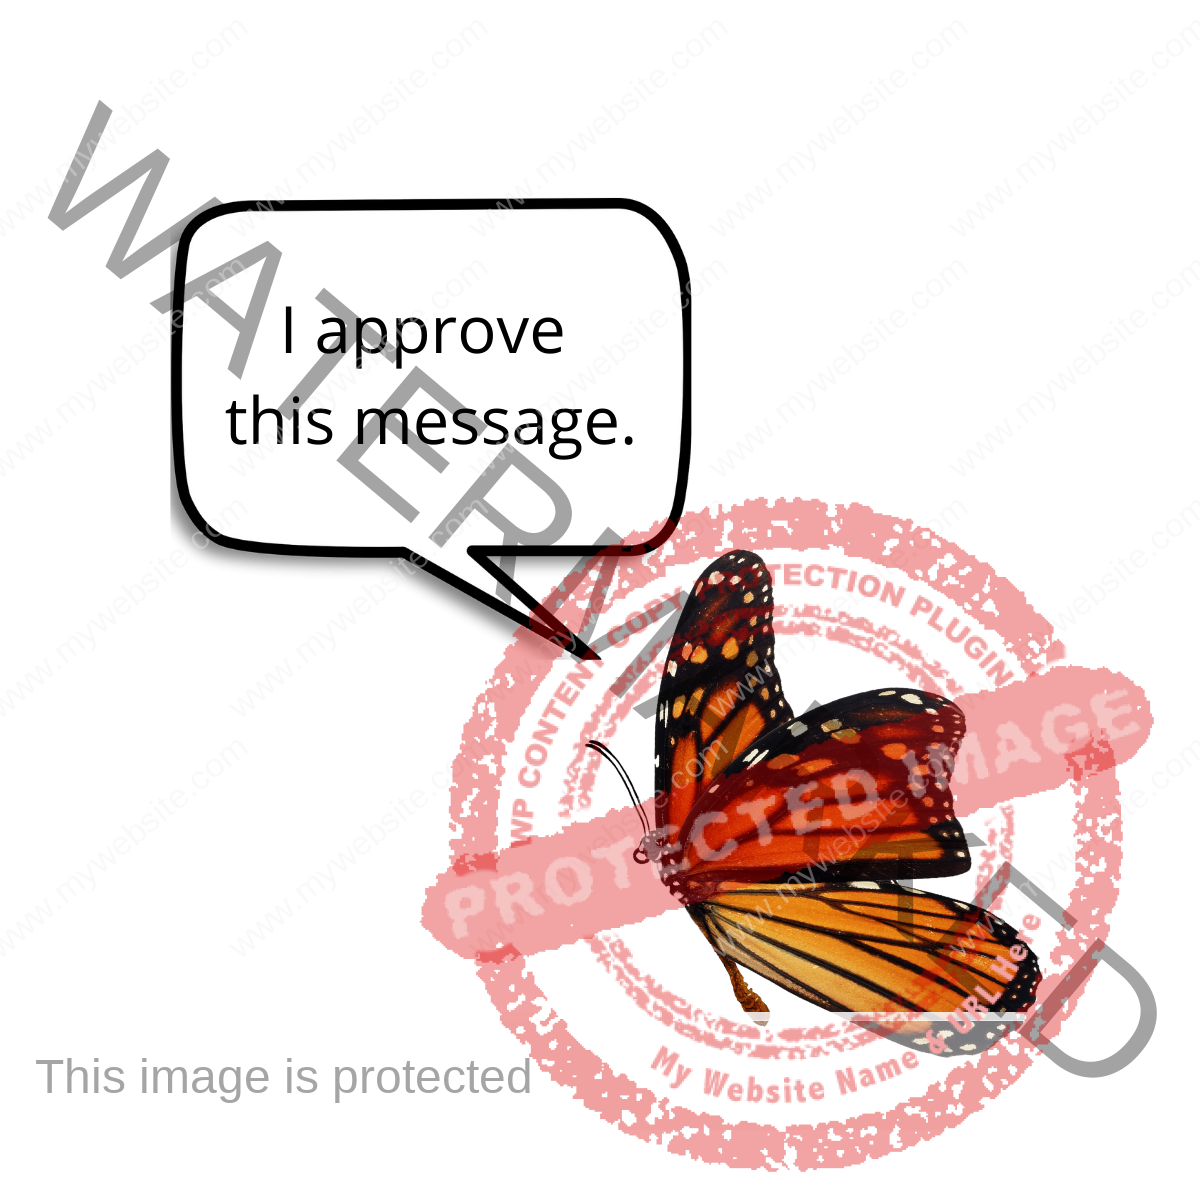 The monarch butterfly says: I approve this message